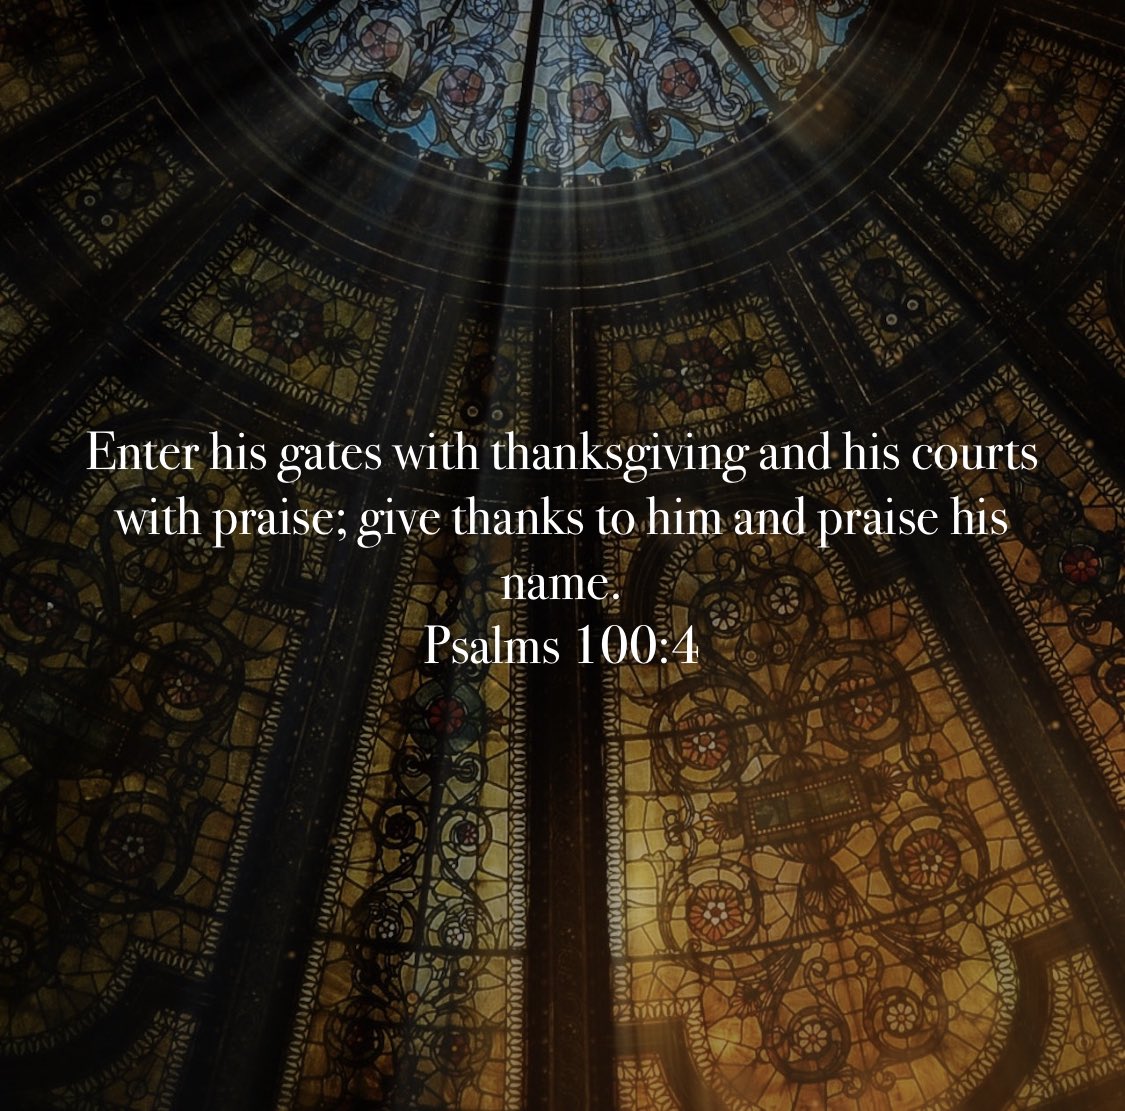 Good Morning!! 🤍✝️🕊️

4 Enter his gates with thanksgiving and his courts with praise; give thanks to him and praise his name. (Psalms 100:4 NIV)

#InfernoMob 🔥 
#PatriotsCross ✝️
#UnitedWeStand 🗽
#UWS369 🇺🇸
#SunnysPatriots 🌞 

#Amen #GodIsGood #PeaceBeWithYou 🙏🏼